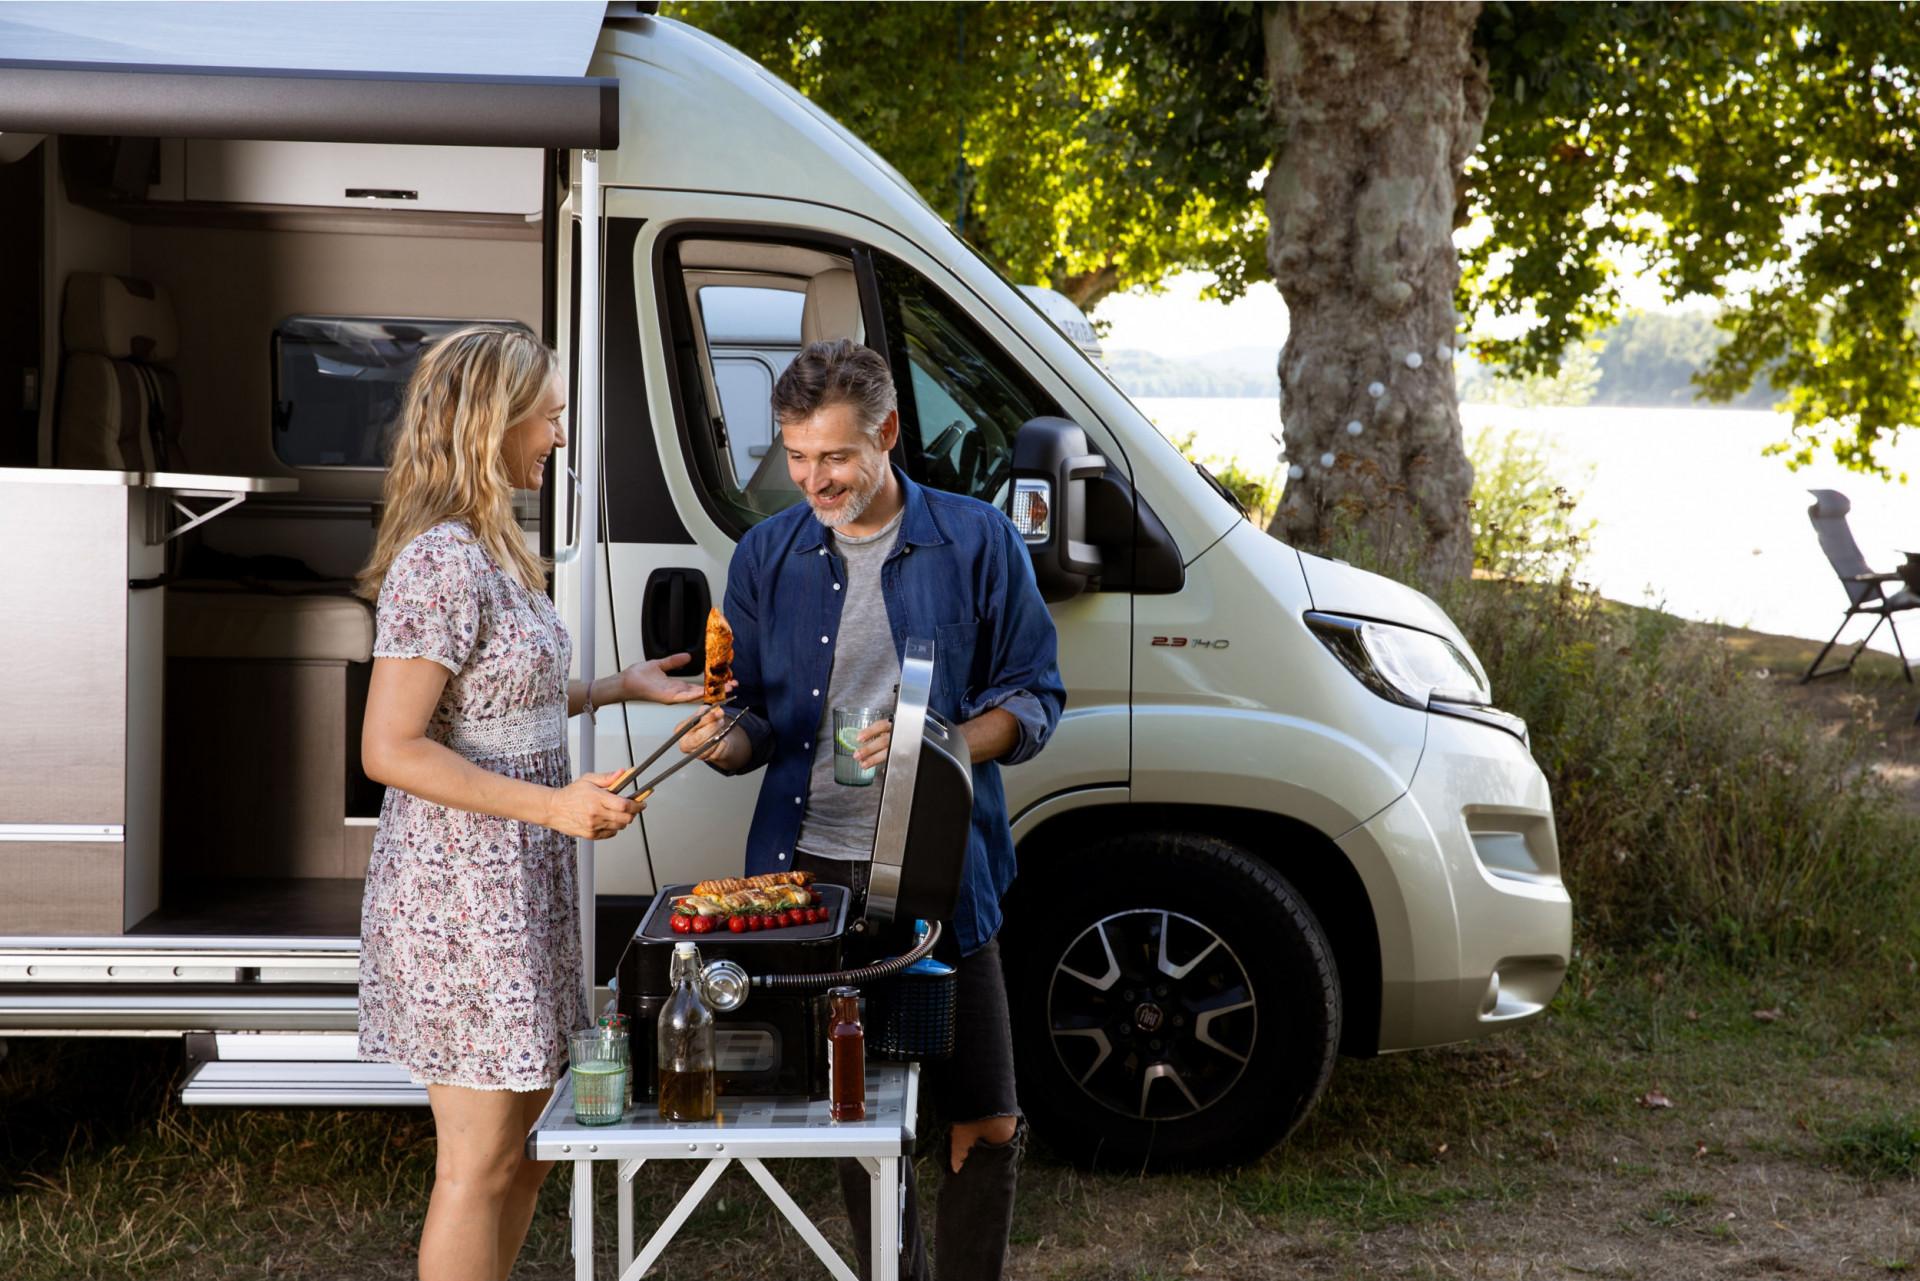 A revolution in cooking while traveling? Campingaz with a proposal of new grills for motorhomes and vans. – image 3